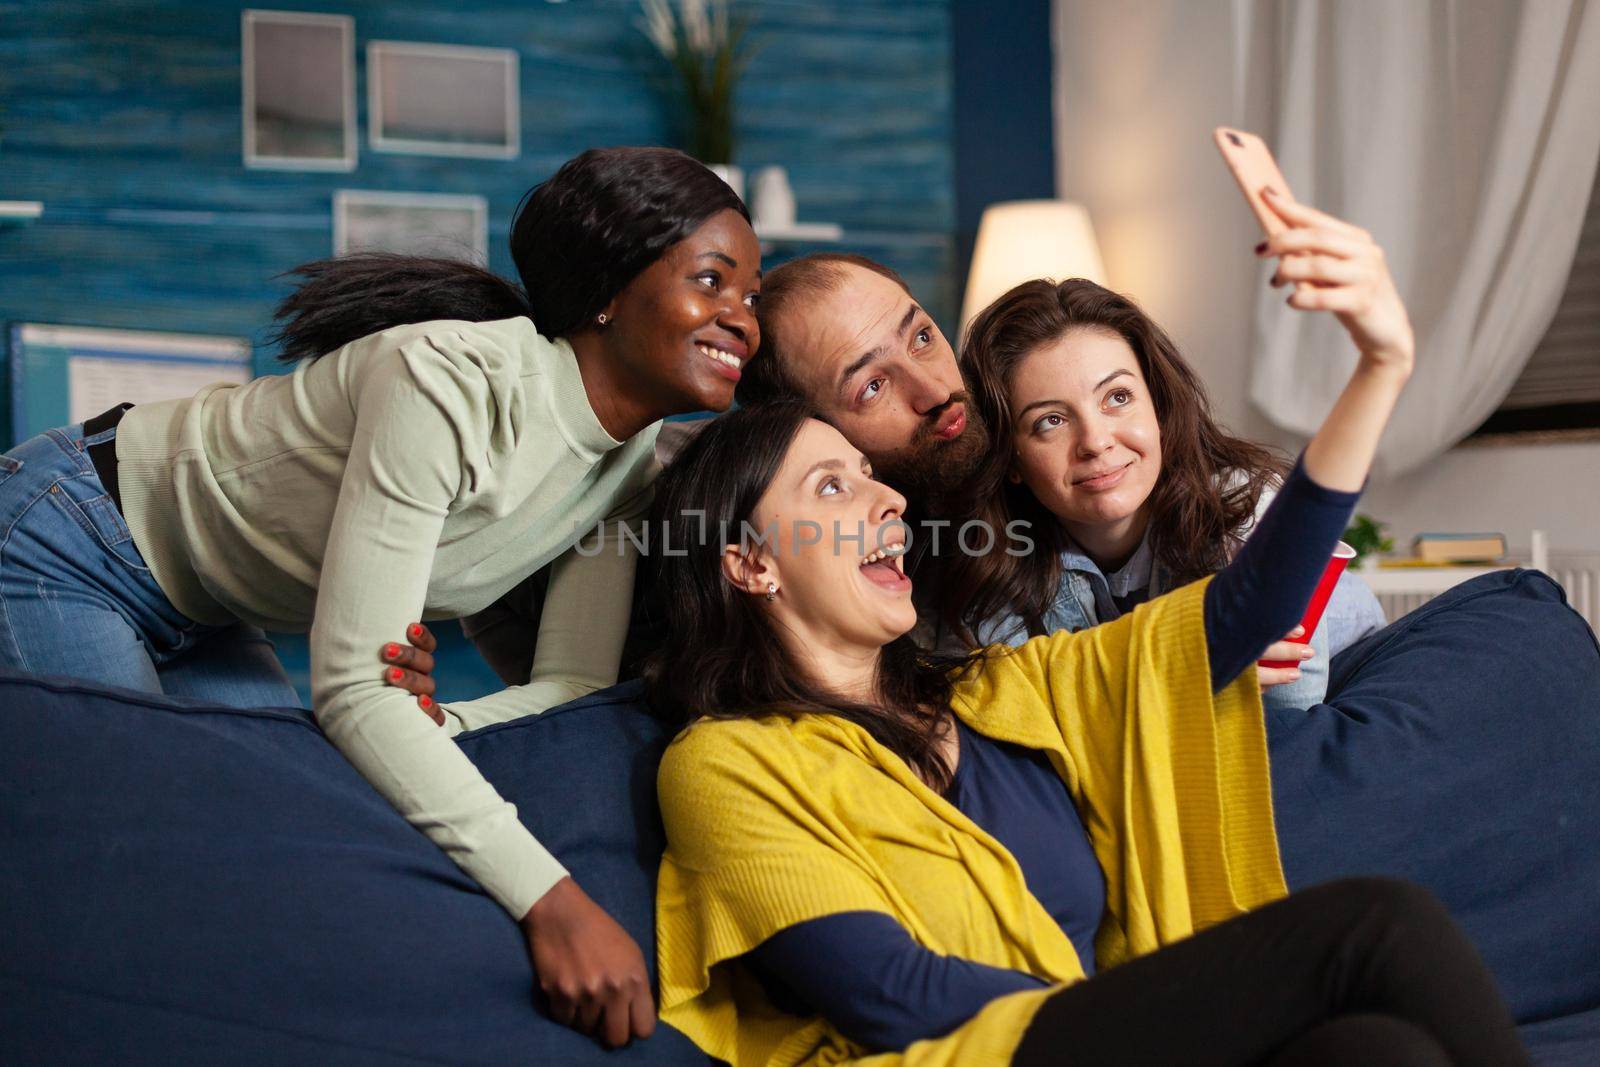 Multiethnic friends making funny faces while taking selfie photo partying in apartment, drinking beer. Group of diverse people laughting, sitting on sofa late at night in living room.